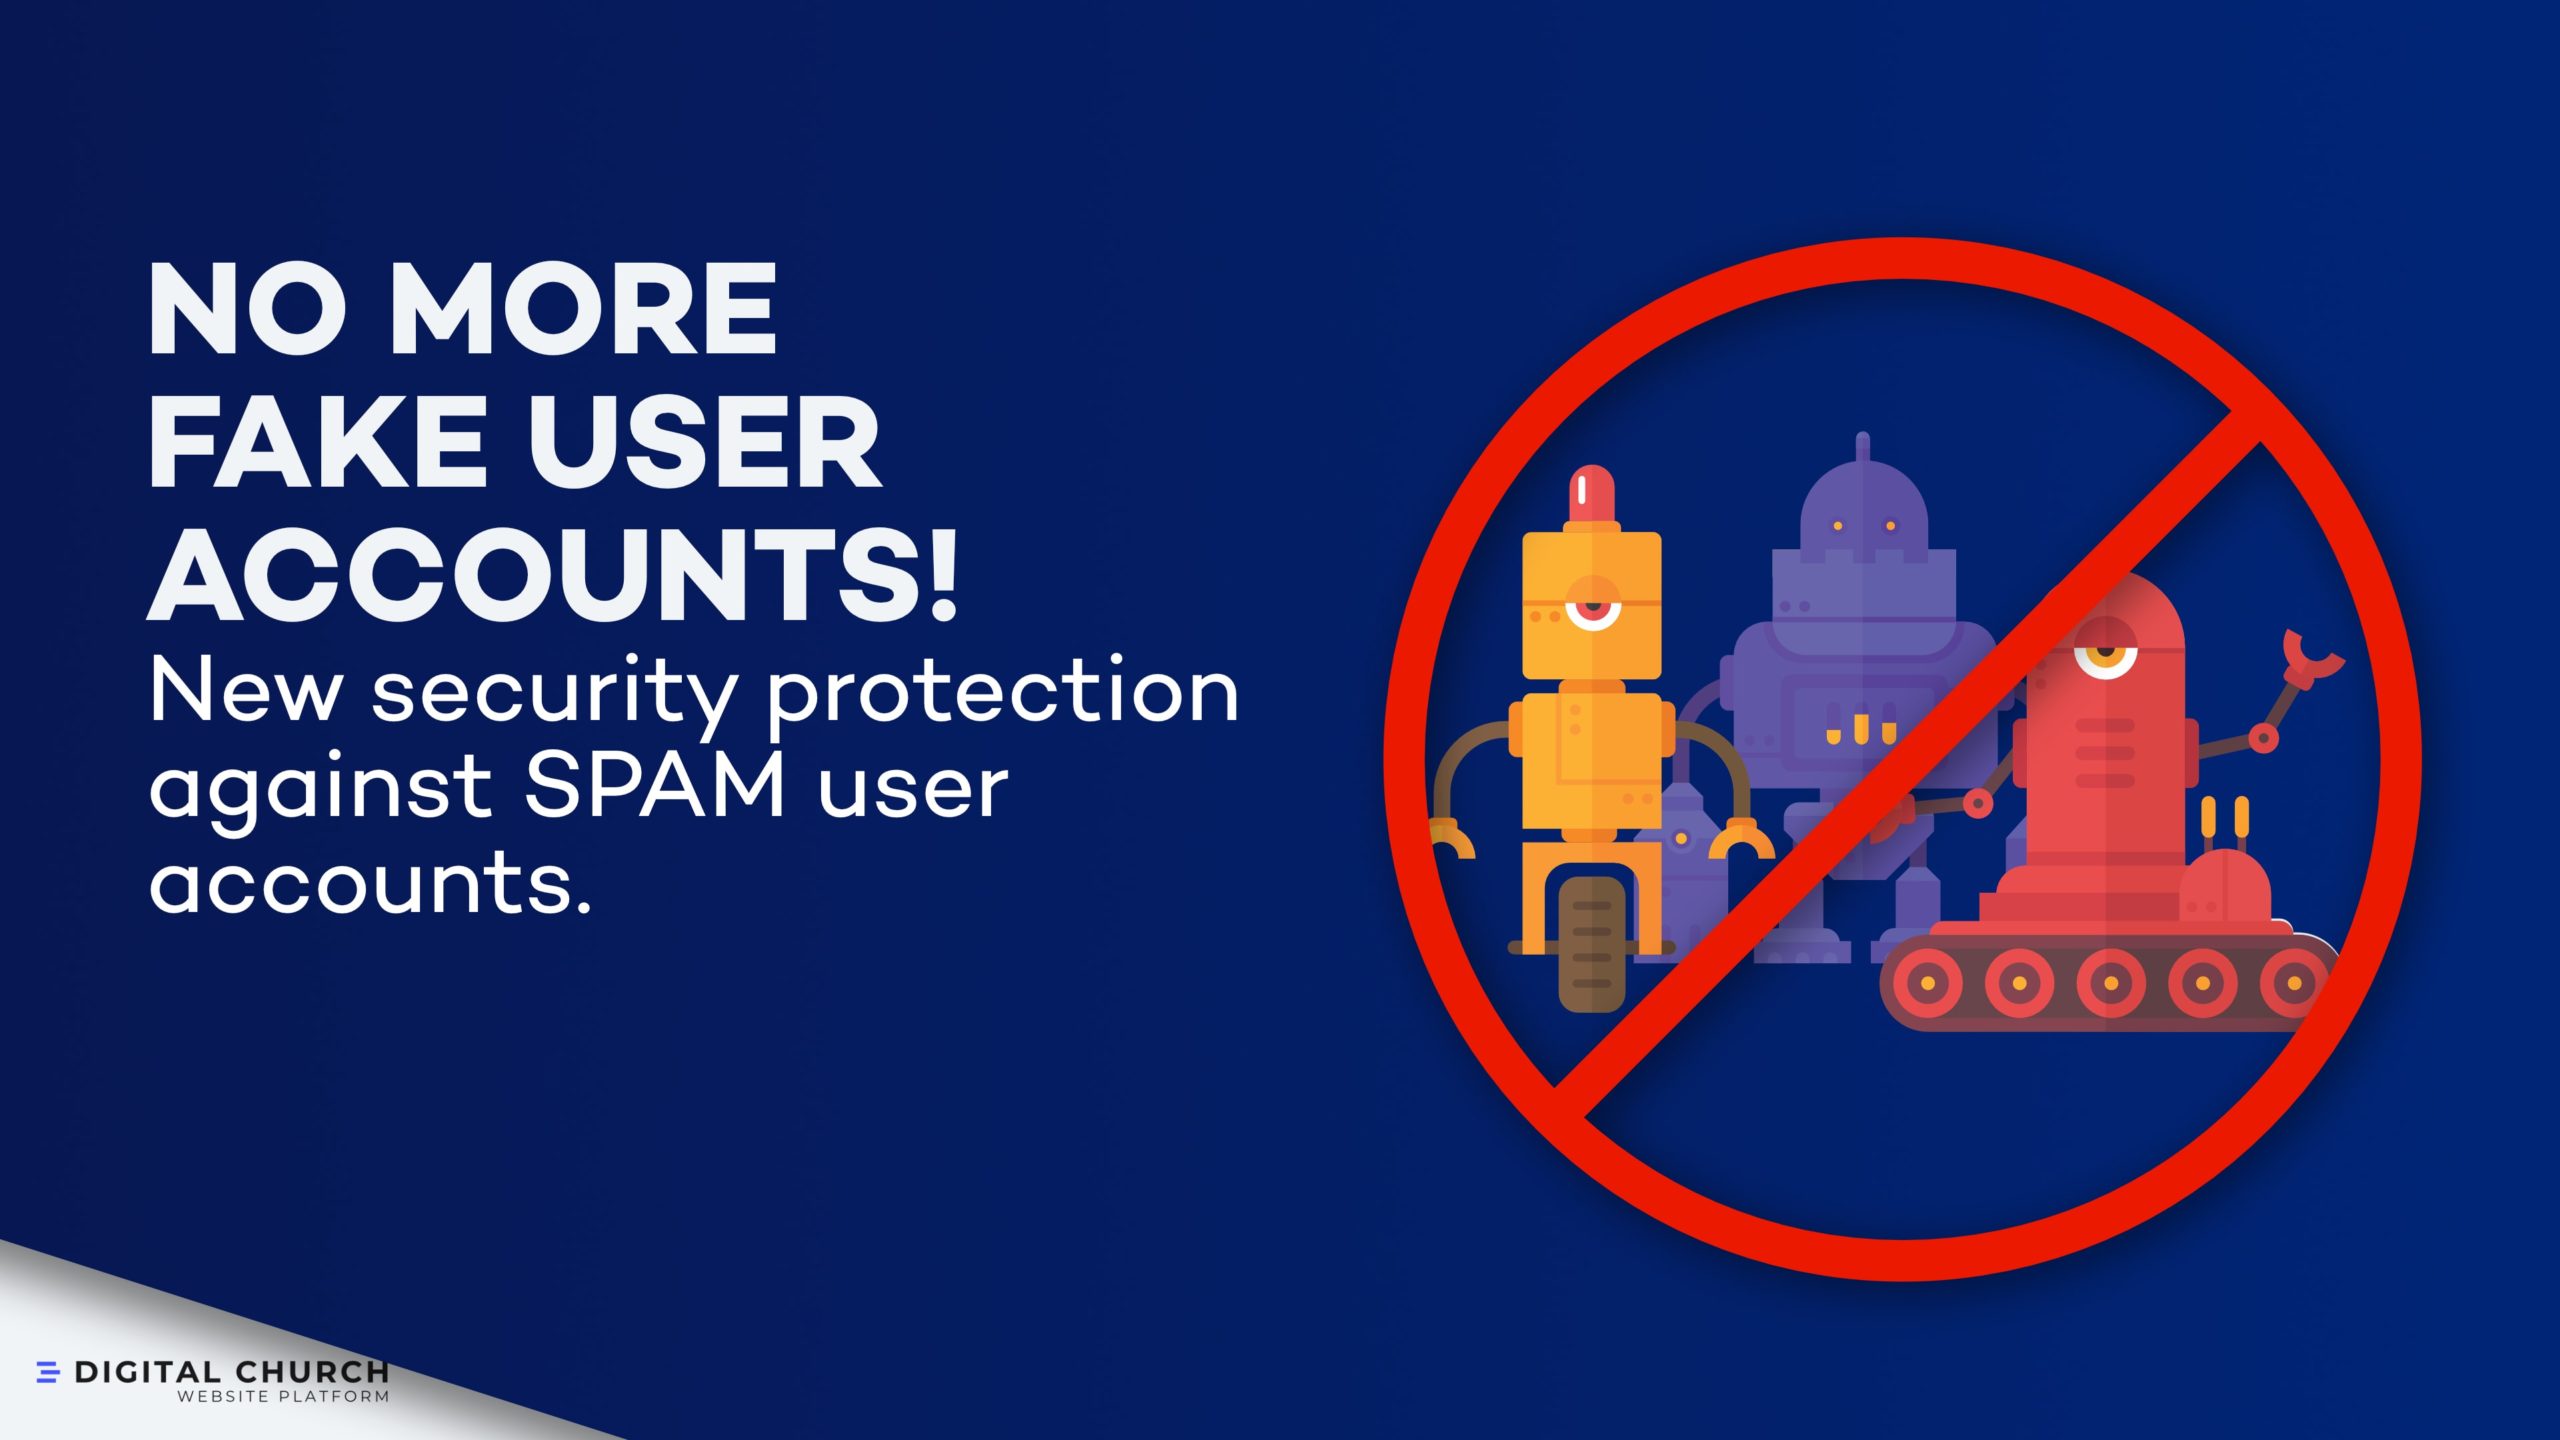 Enhance the security of church websites with a new protection system that prevents fake user accounts and spam.